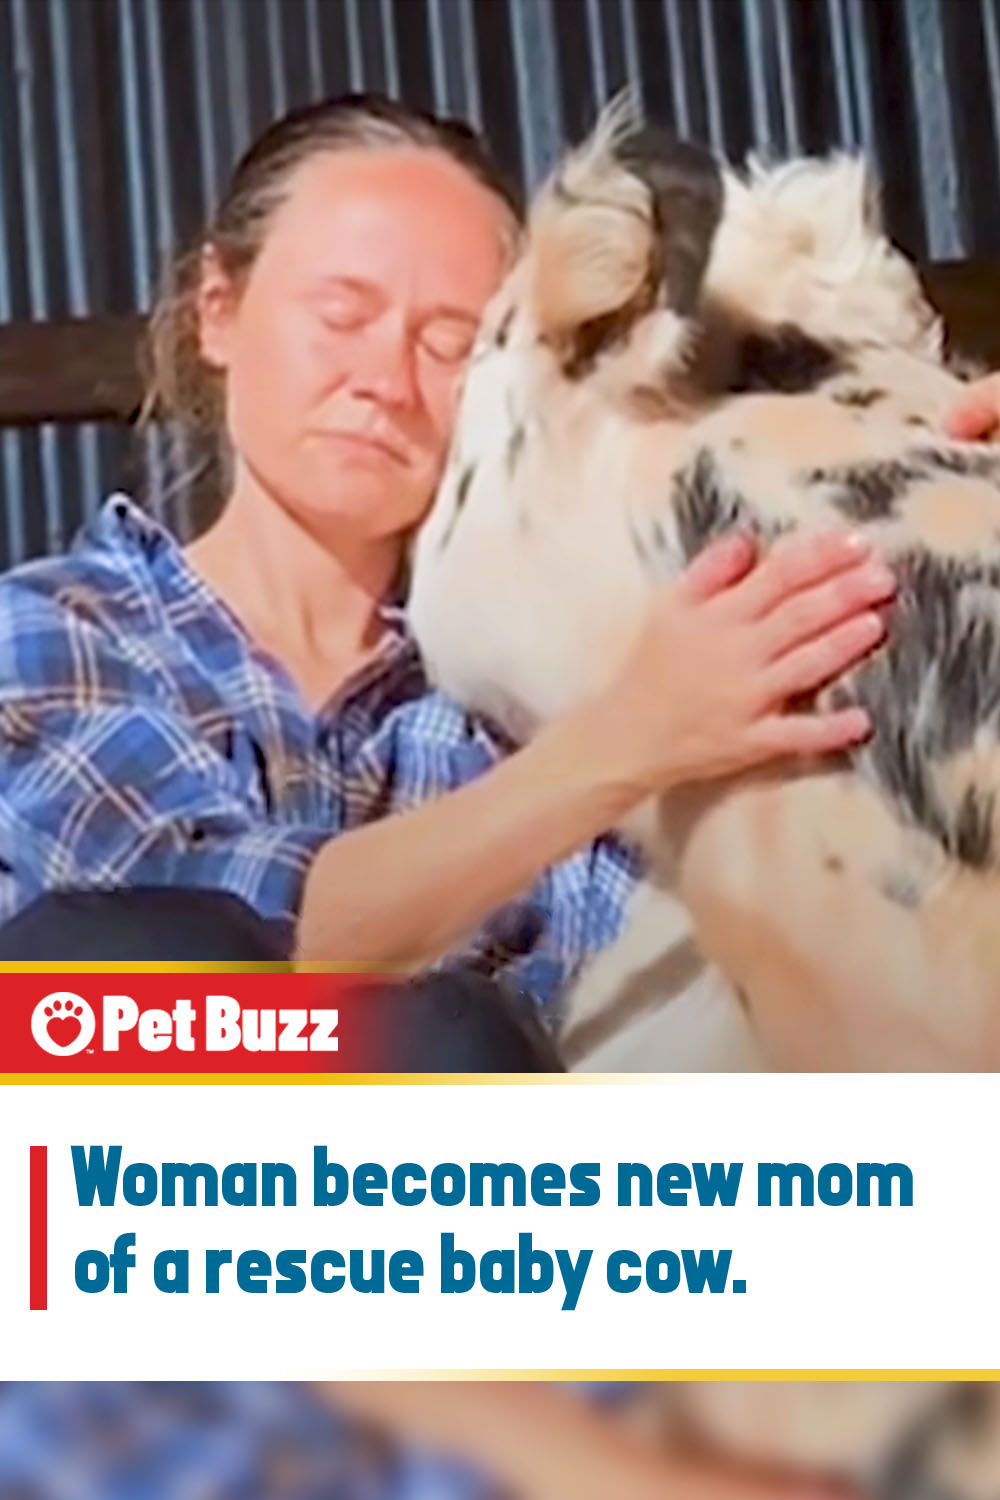 Woman becomes new mom of a rescue baby cow.